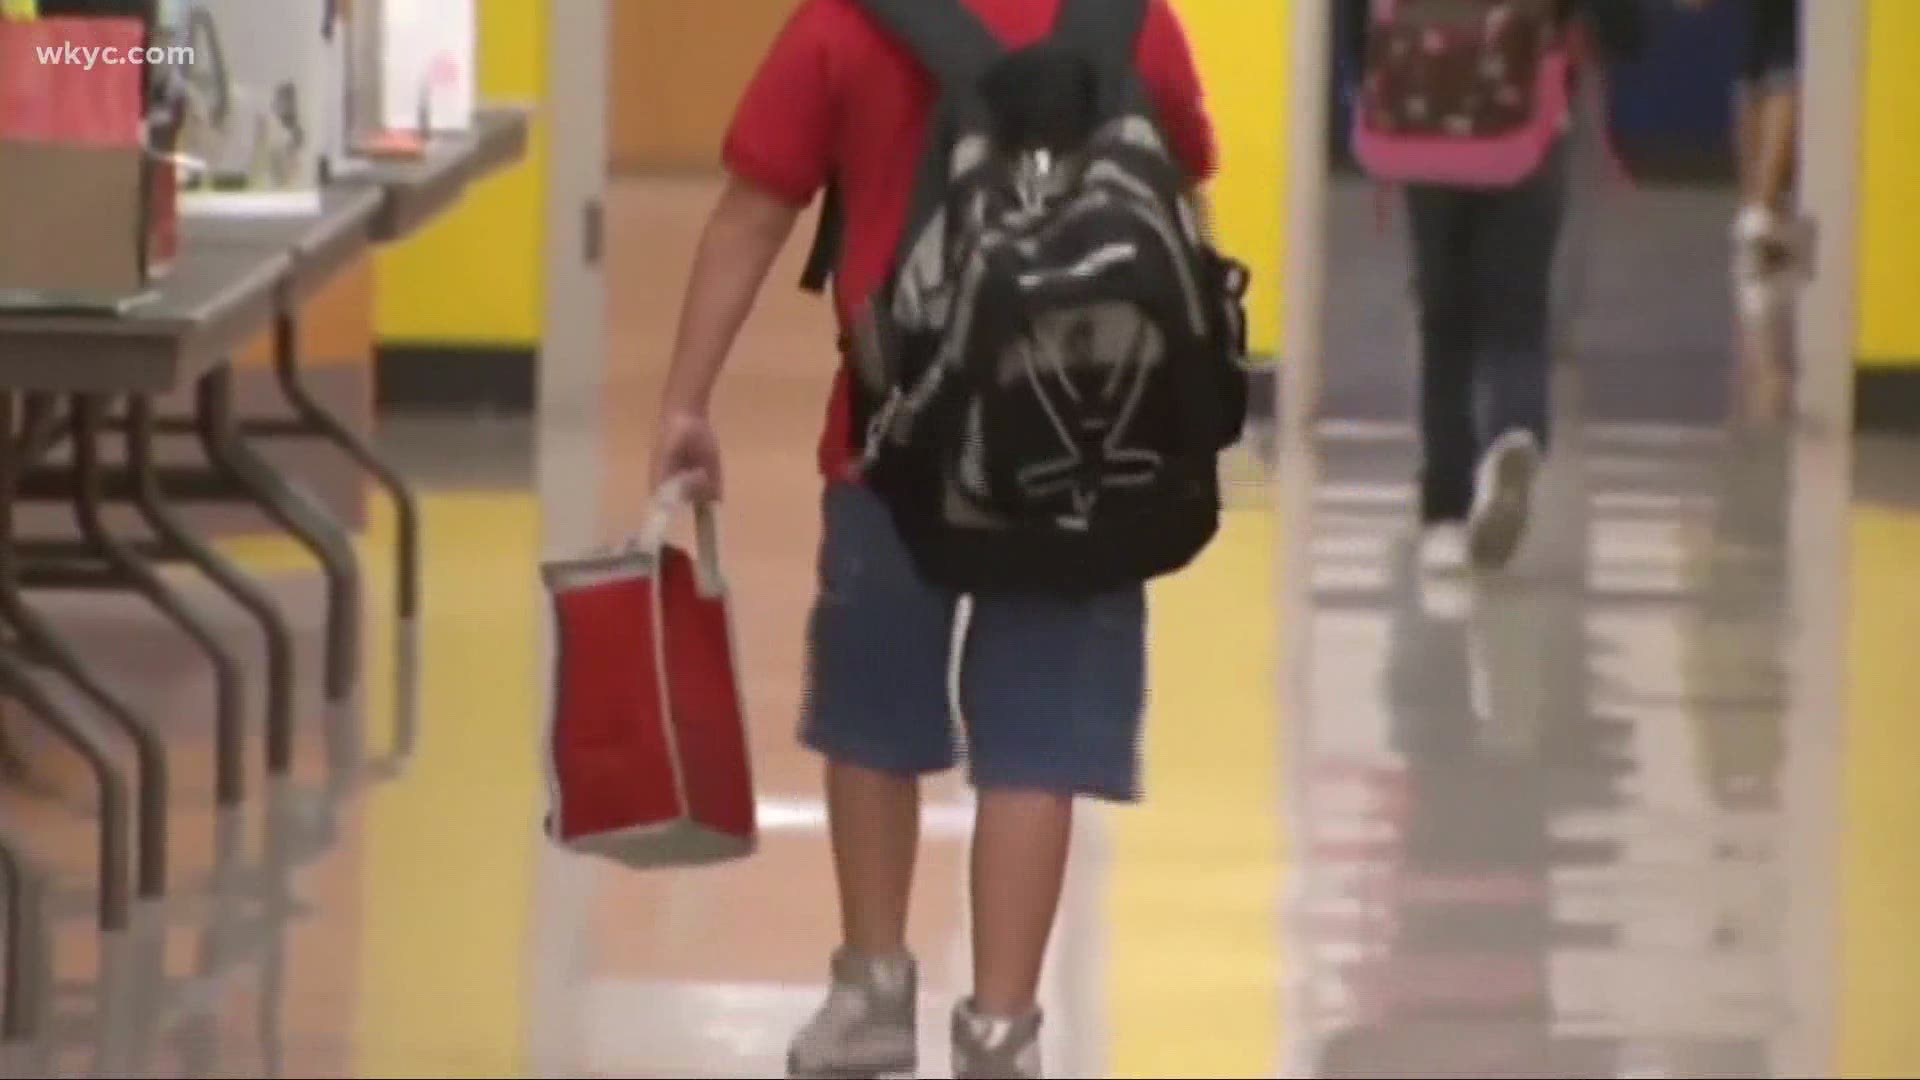 Back-to-school season will be unlike any other. 3news' Rachel Polansky has tips on how parents can keep their children safe.